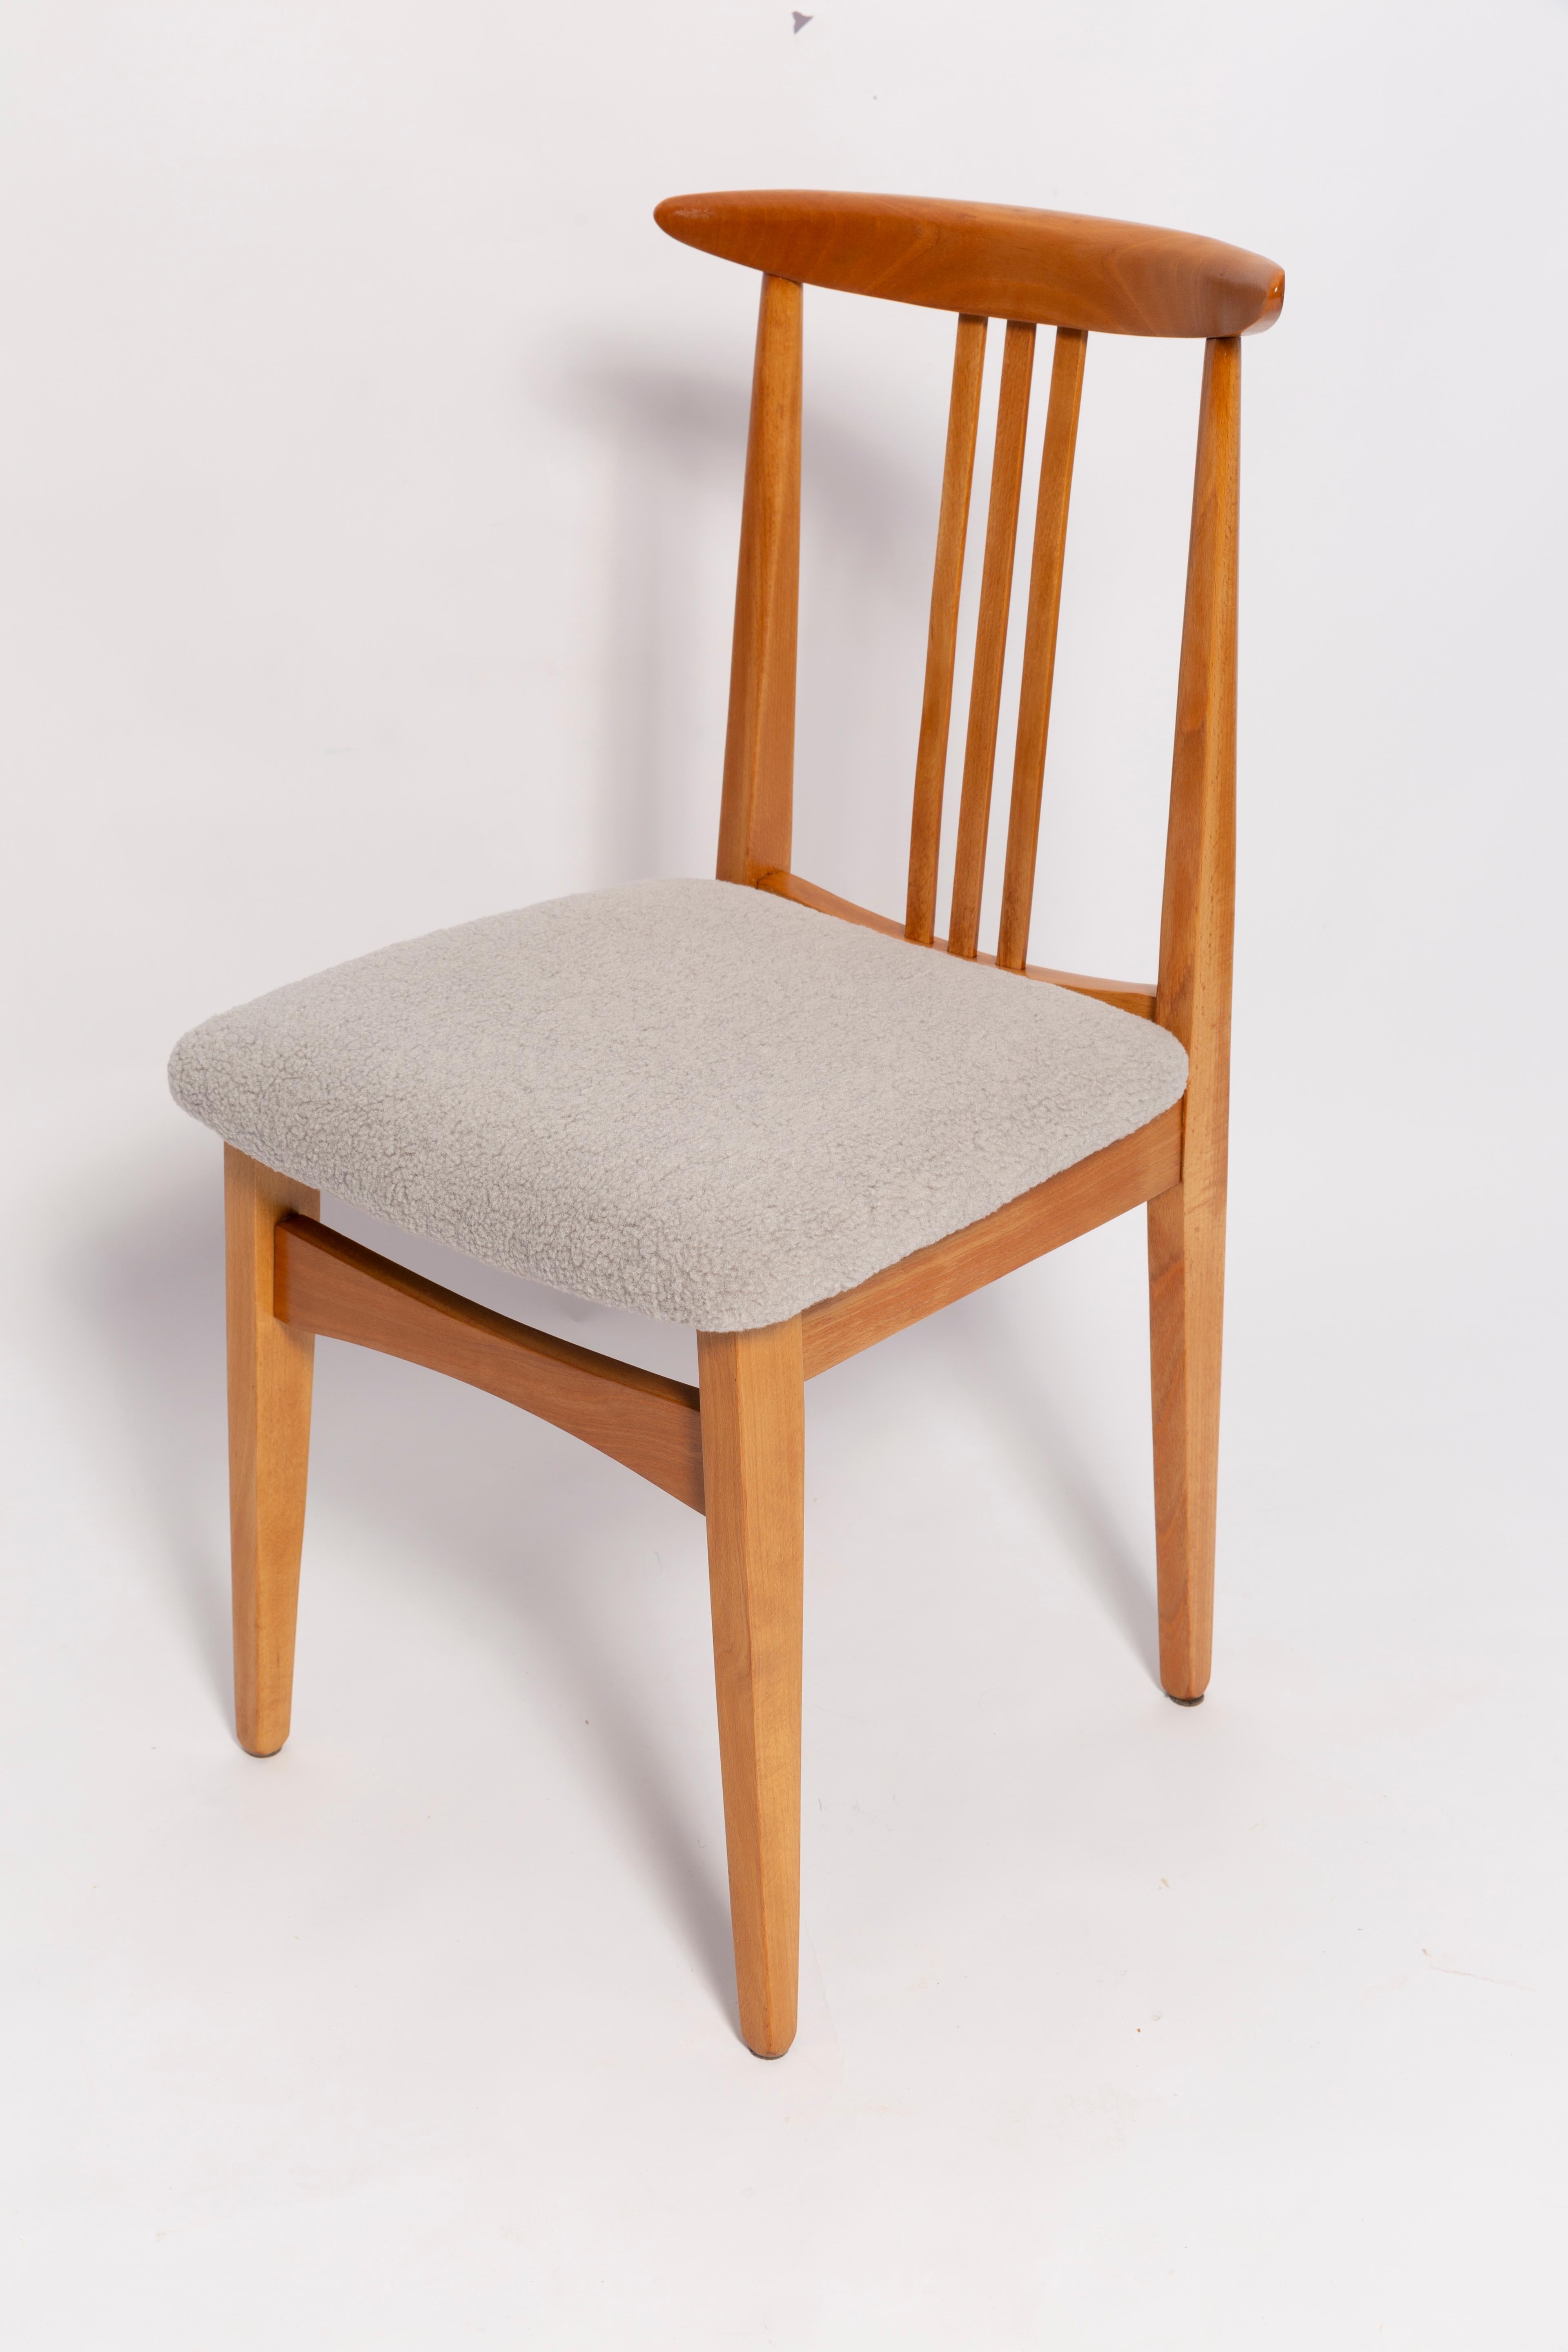 Set of Eight Mid-Century Linen Boucle Chairs, by M. Zielinski, Europe, 1960s For Sale 1